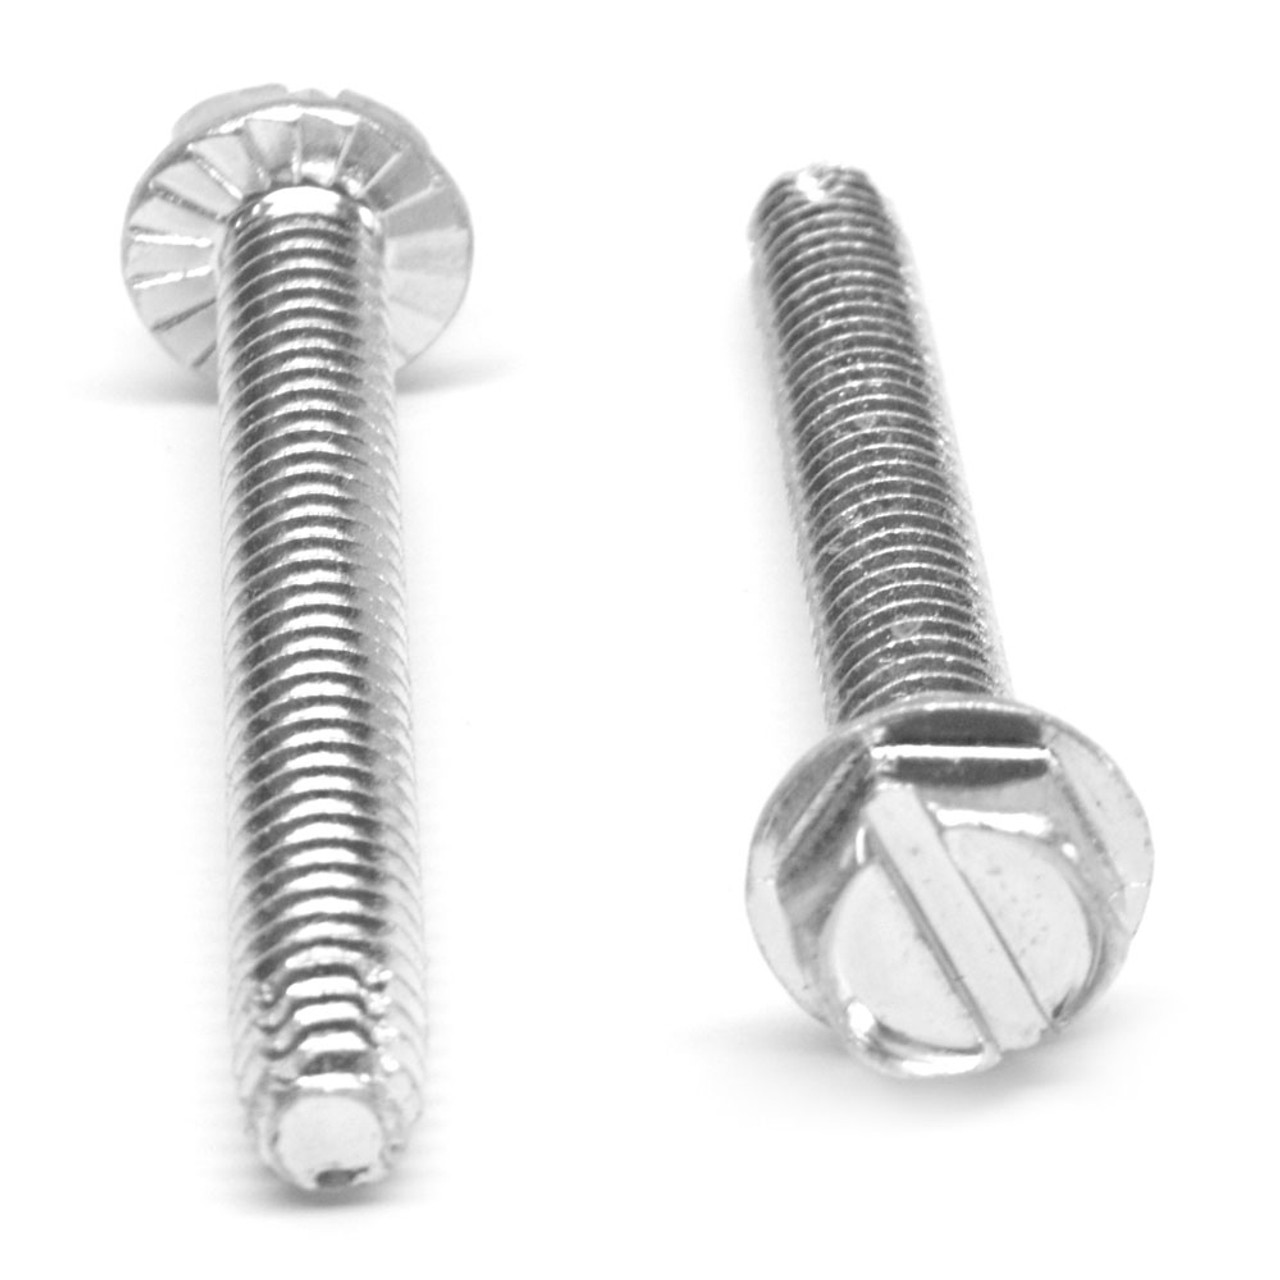 1/2-13 x 1 1/4 Coarse Thread Thread Cutting Screw Slotted Hex Washer Head with Serration Type F Low Carbon Steel Zinc Plated